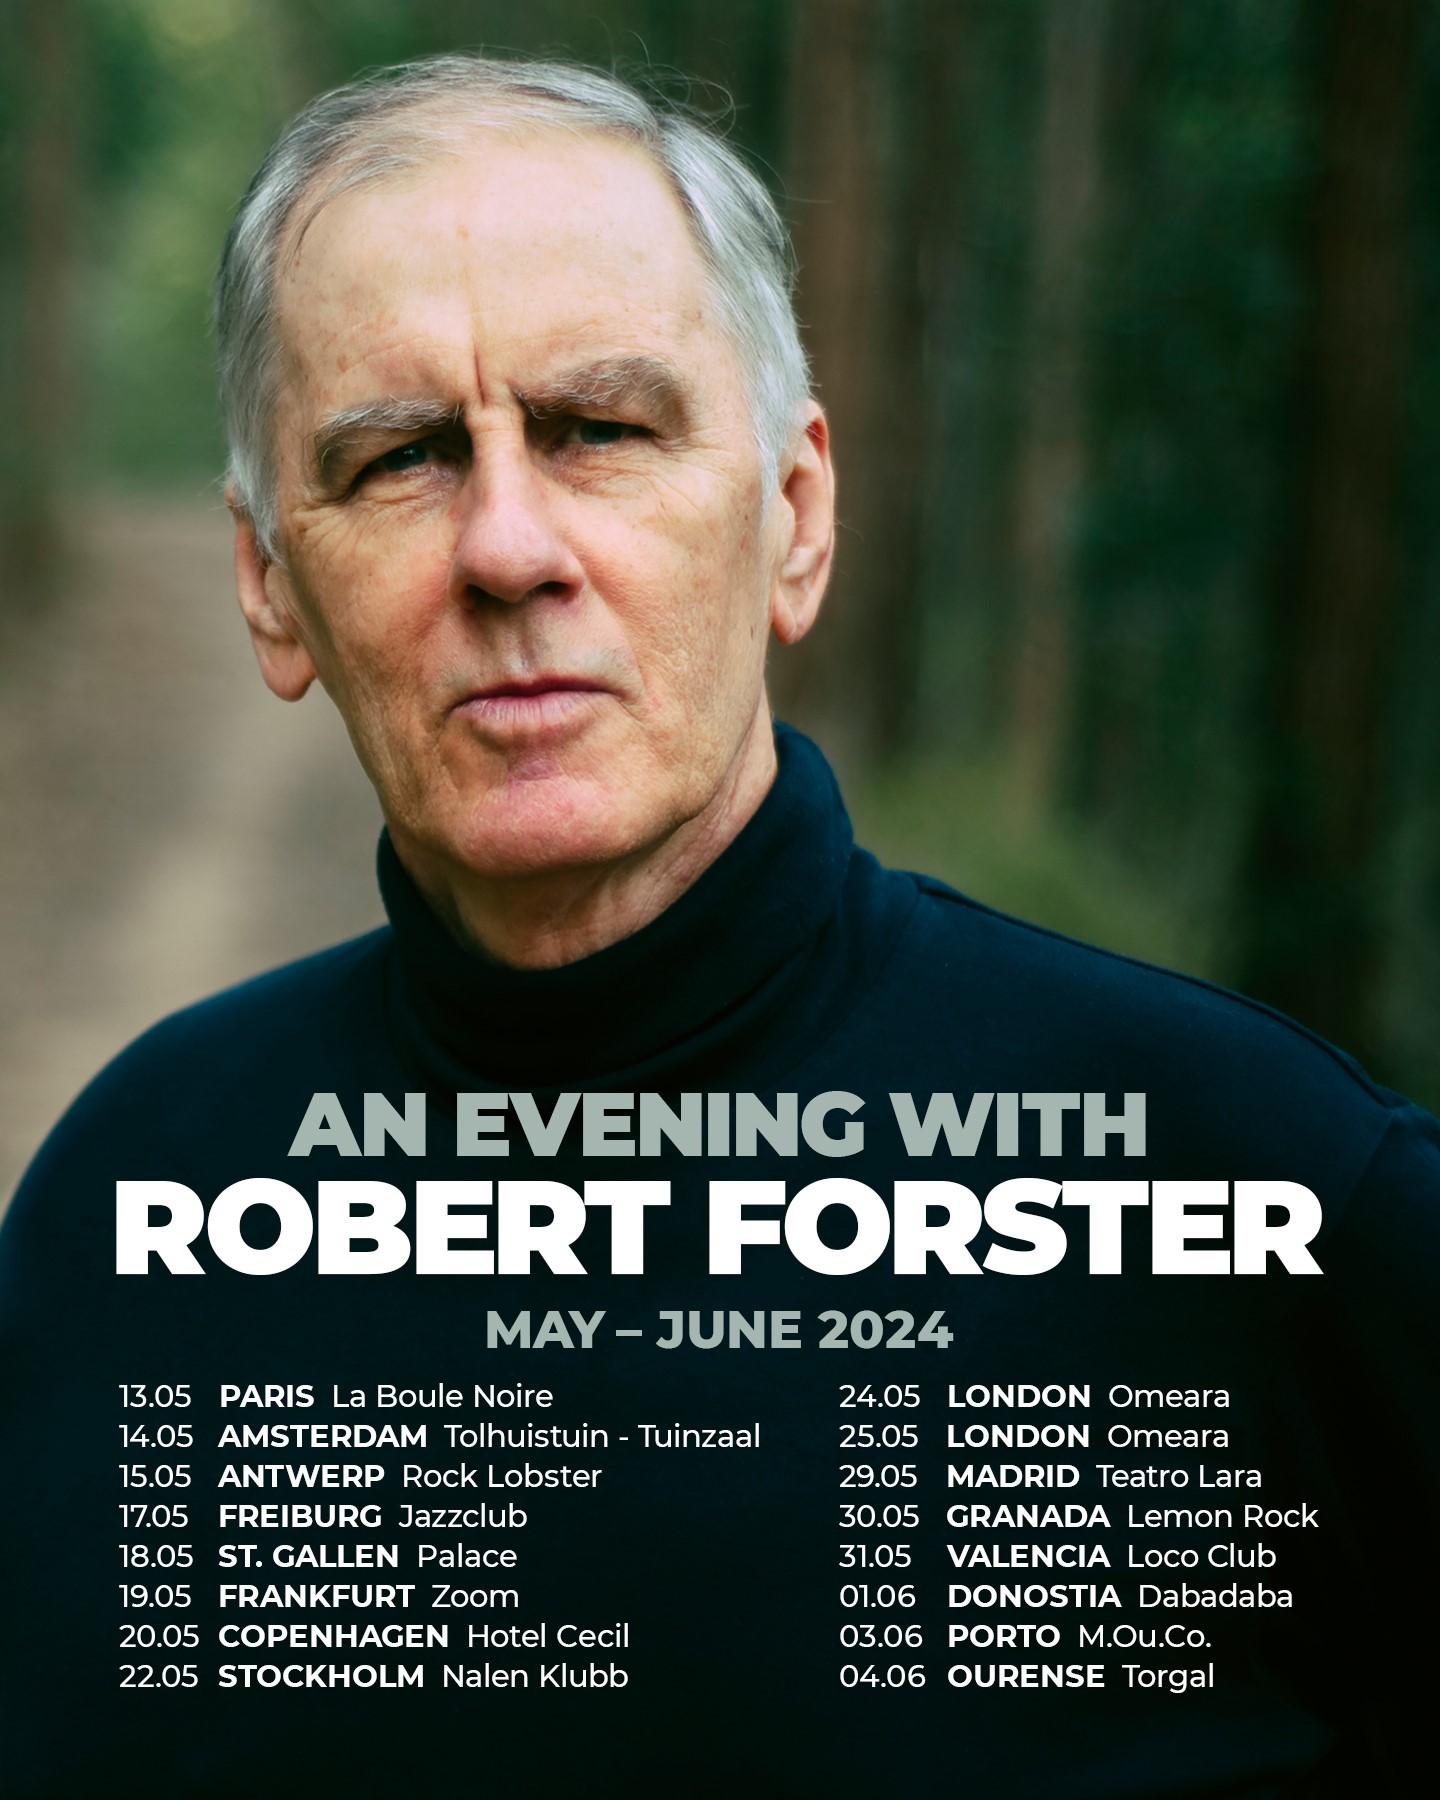 Robert Forster tour poster for May-June 2024